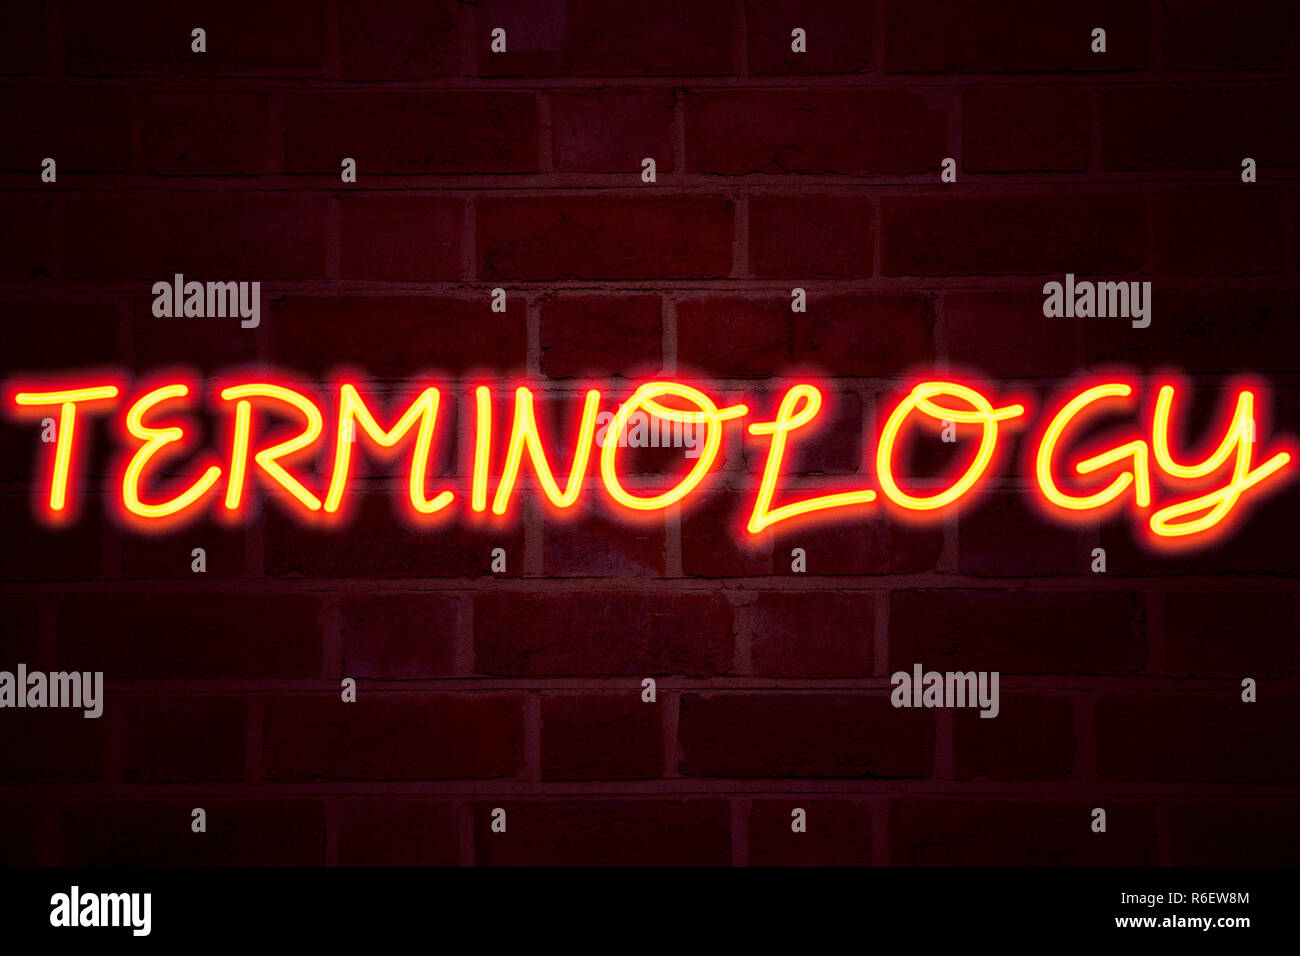 Terminology Neon Sign On Brick Wall Background Fluorescent Neon Tube Sign On Brickwork Business 